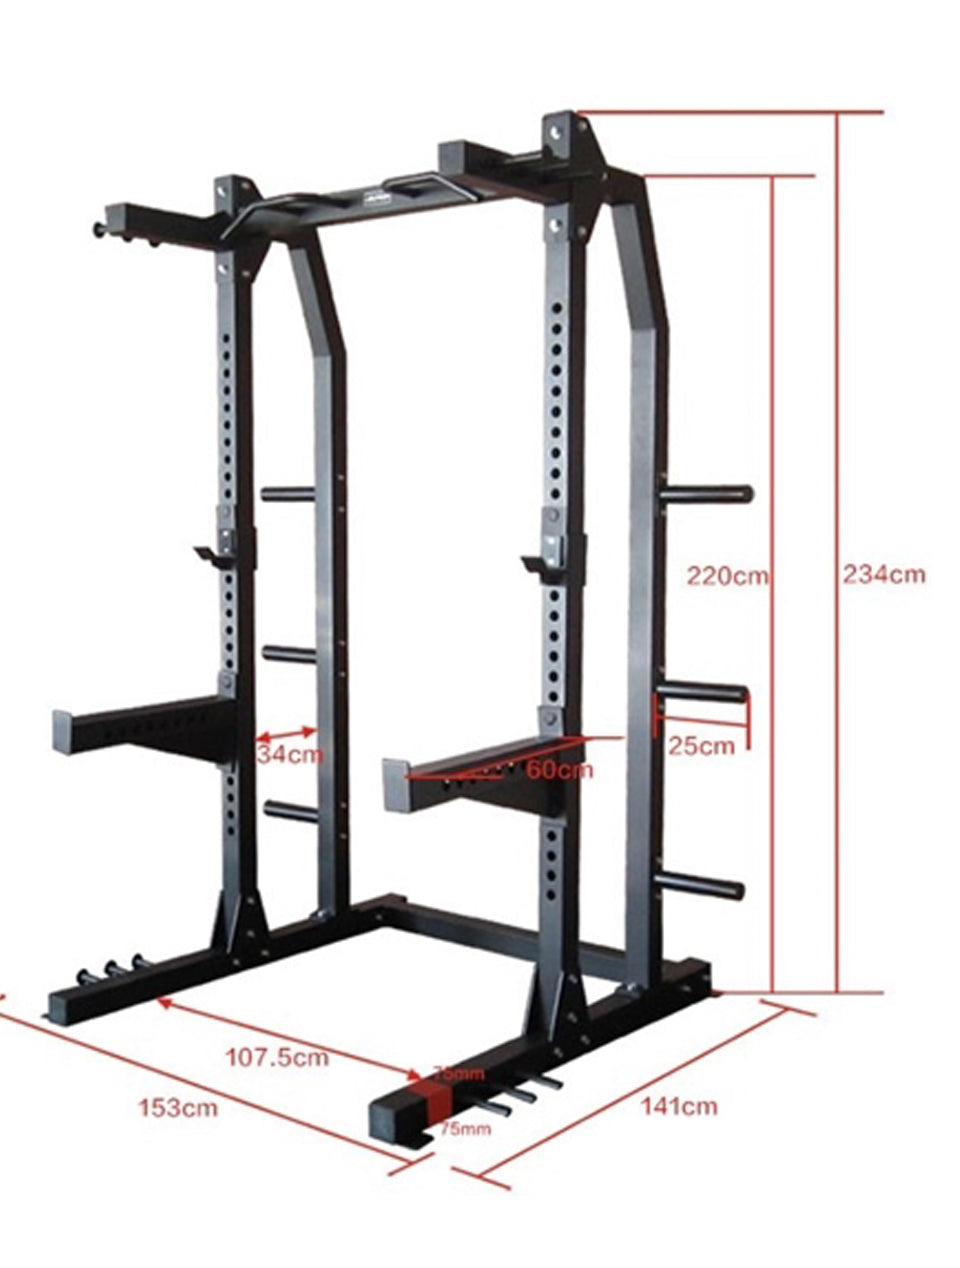 1441 Fitness Heavy Duty Semi Commercial Half Cage Squat Rack with Pull Up Bar J611